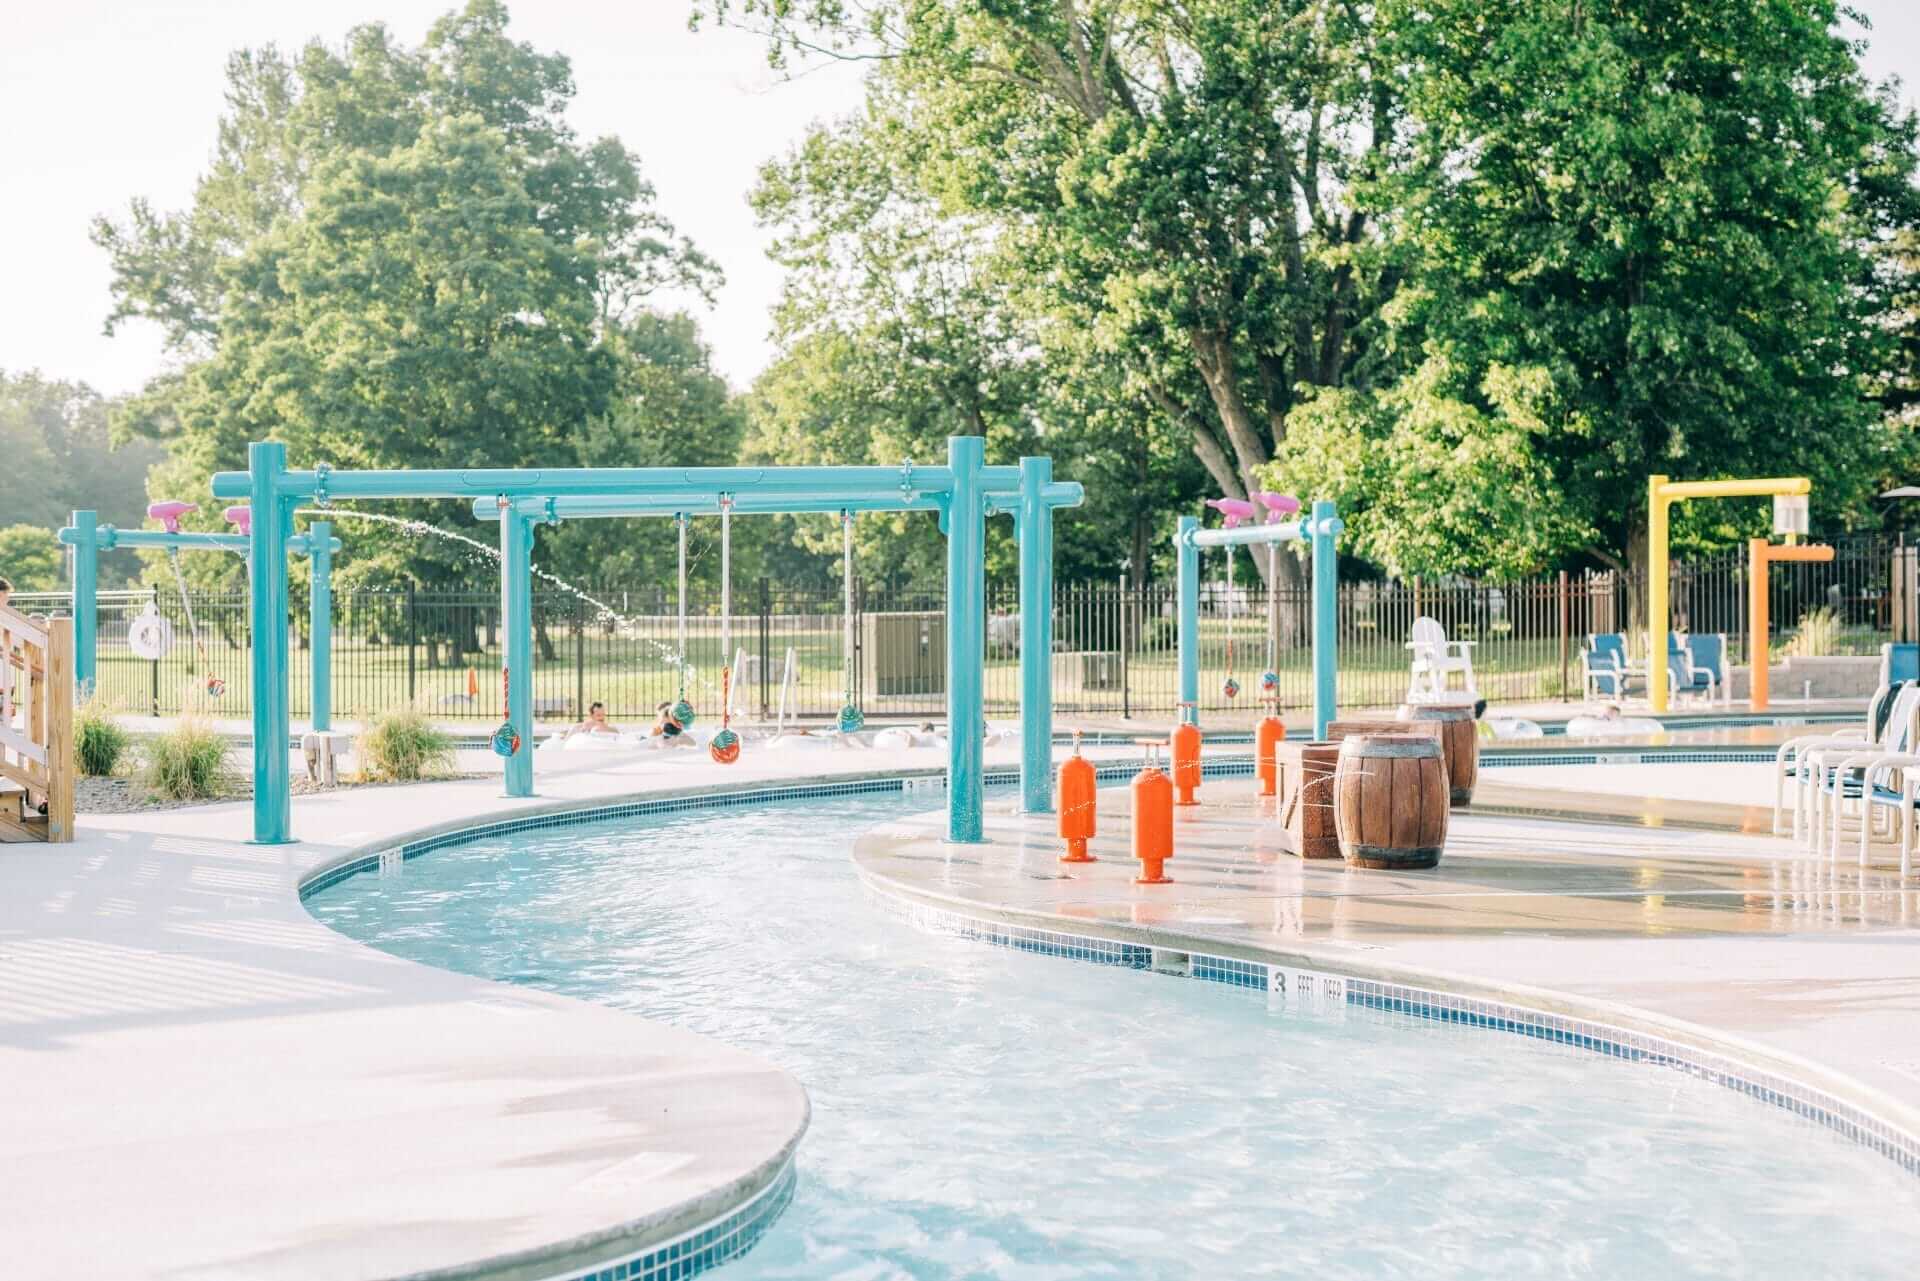 Interactive water features installed at the lazy river in Gardiner, New York.